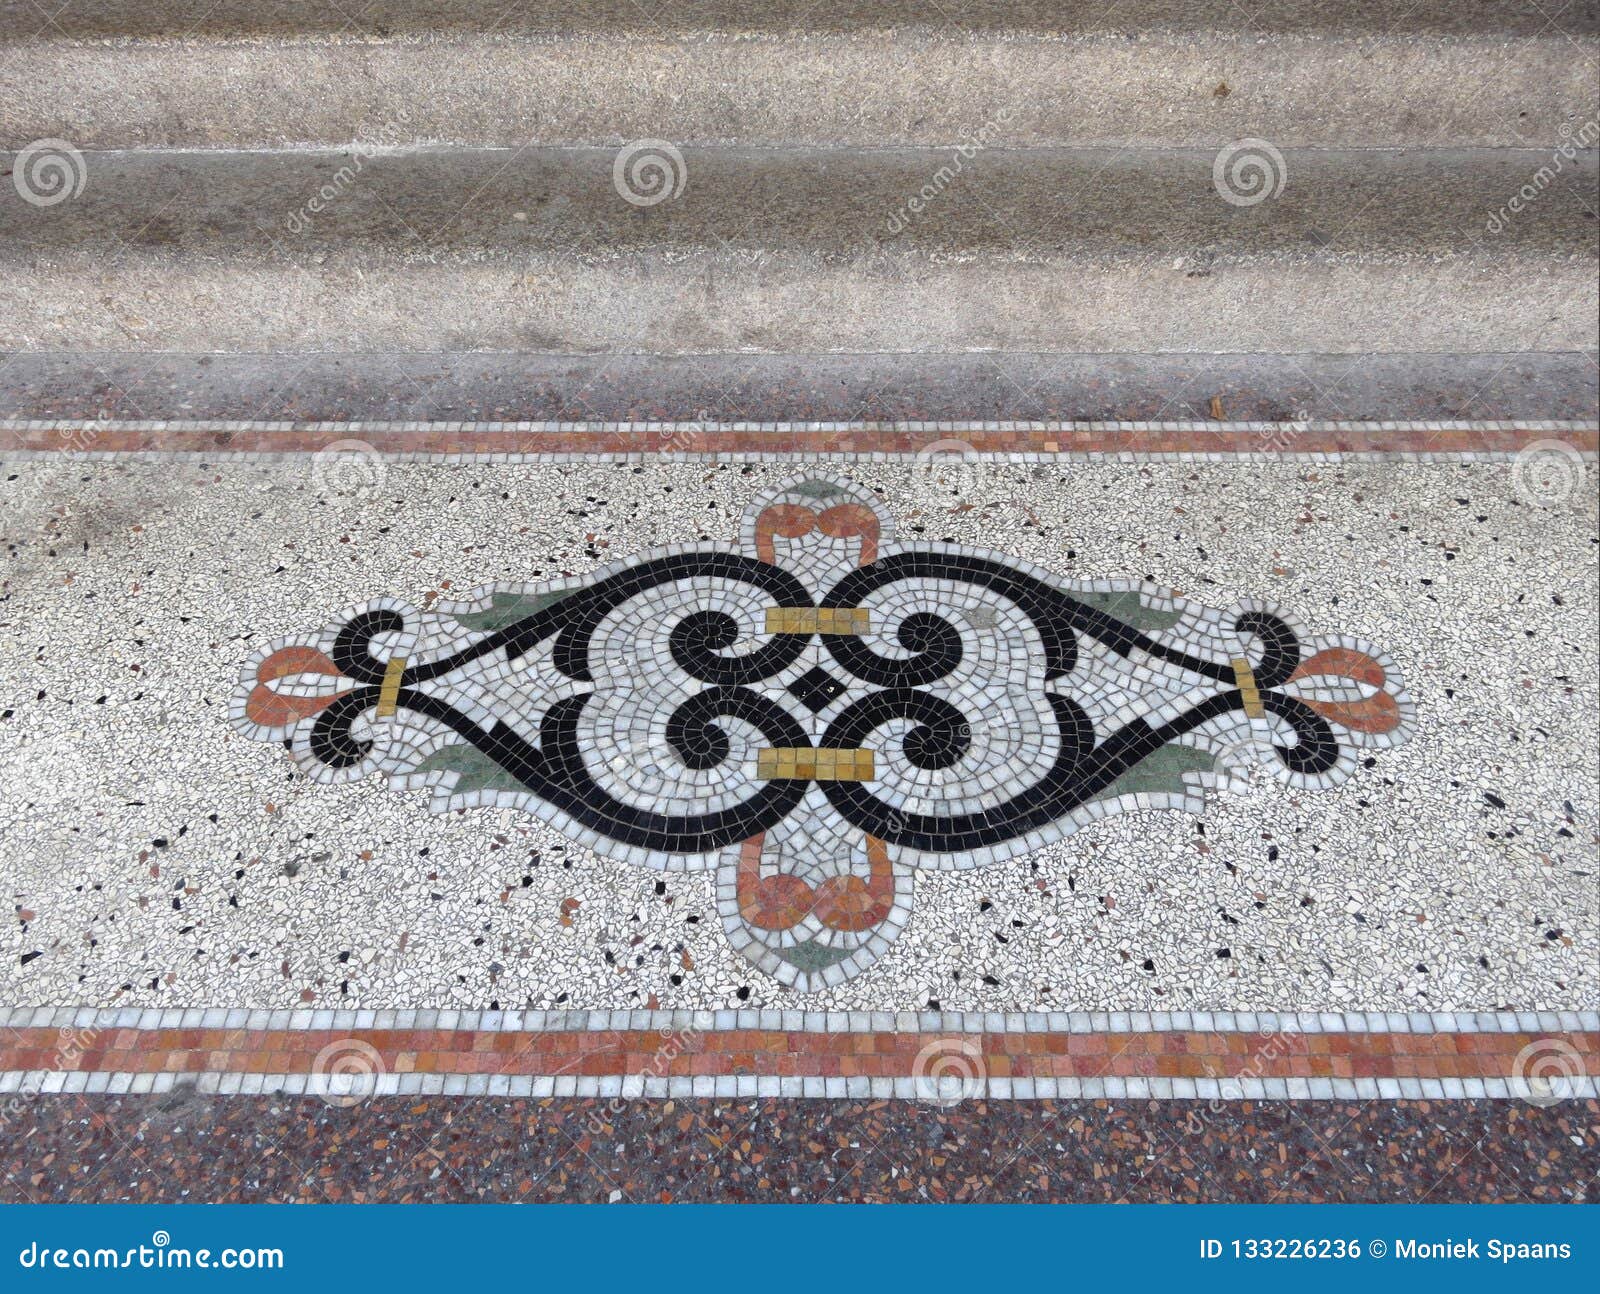 granito decoration on the floor of a building in amsterdam